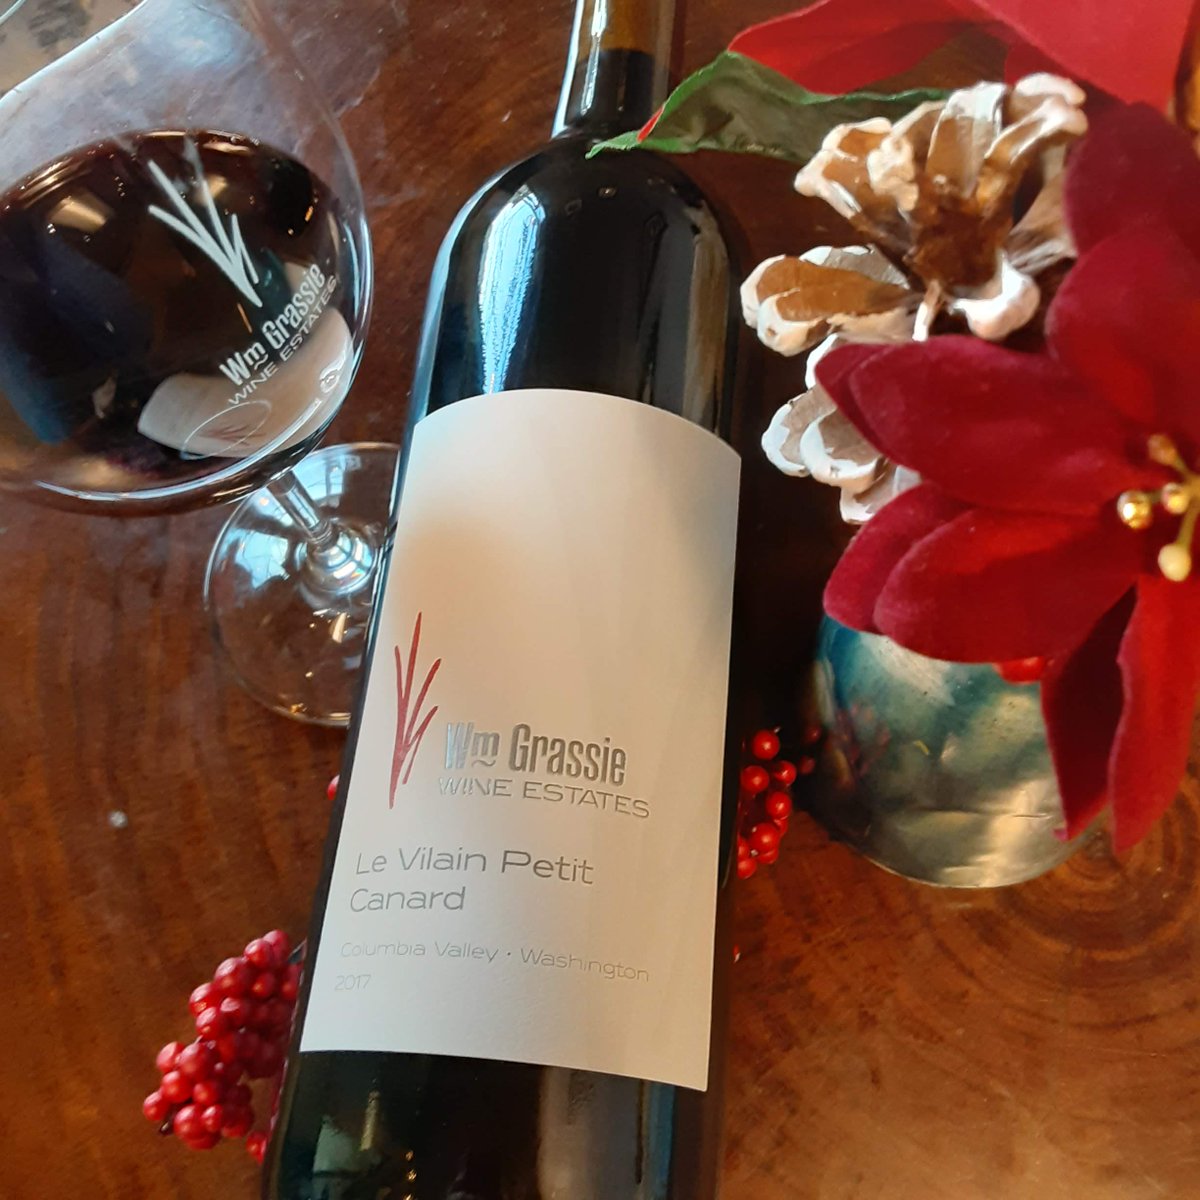 Happy Thirsty Thursday!
What's in your glass tonight?! 🍷
#wmgrassiewine #merlot #redwine #holiday #sipsiphooray #tastingroom #Snoqualmie #Duvall #wineclub #christmastime #drinklocal #siplocal #wawinery #snovalleywinery #winesthatdelight